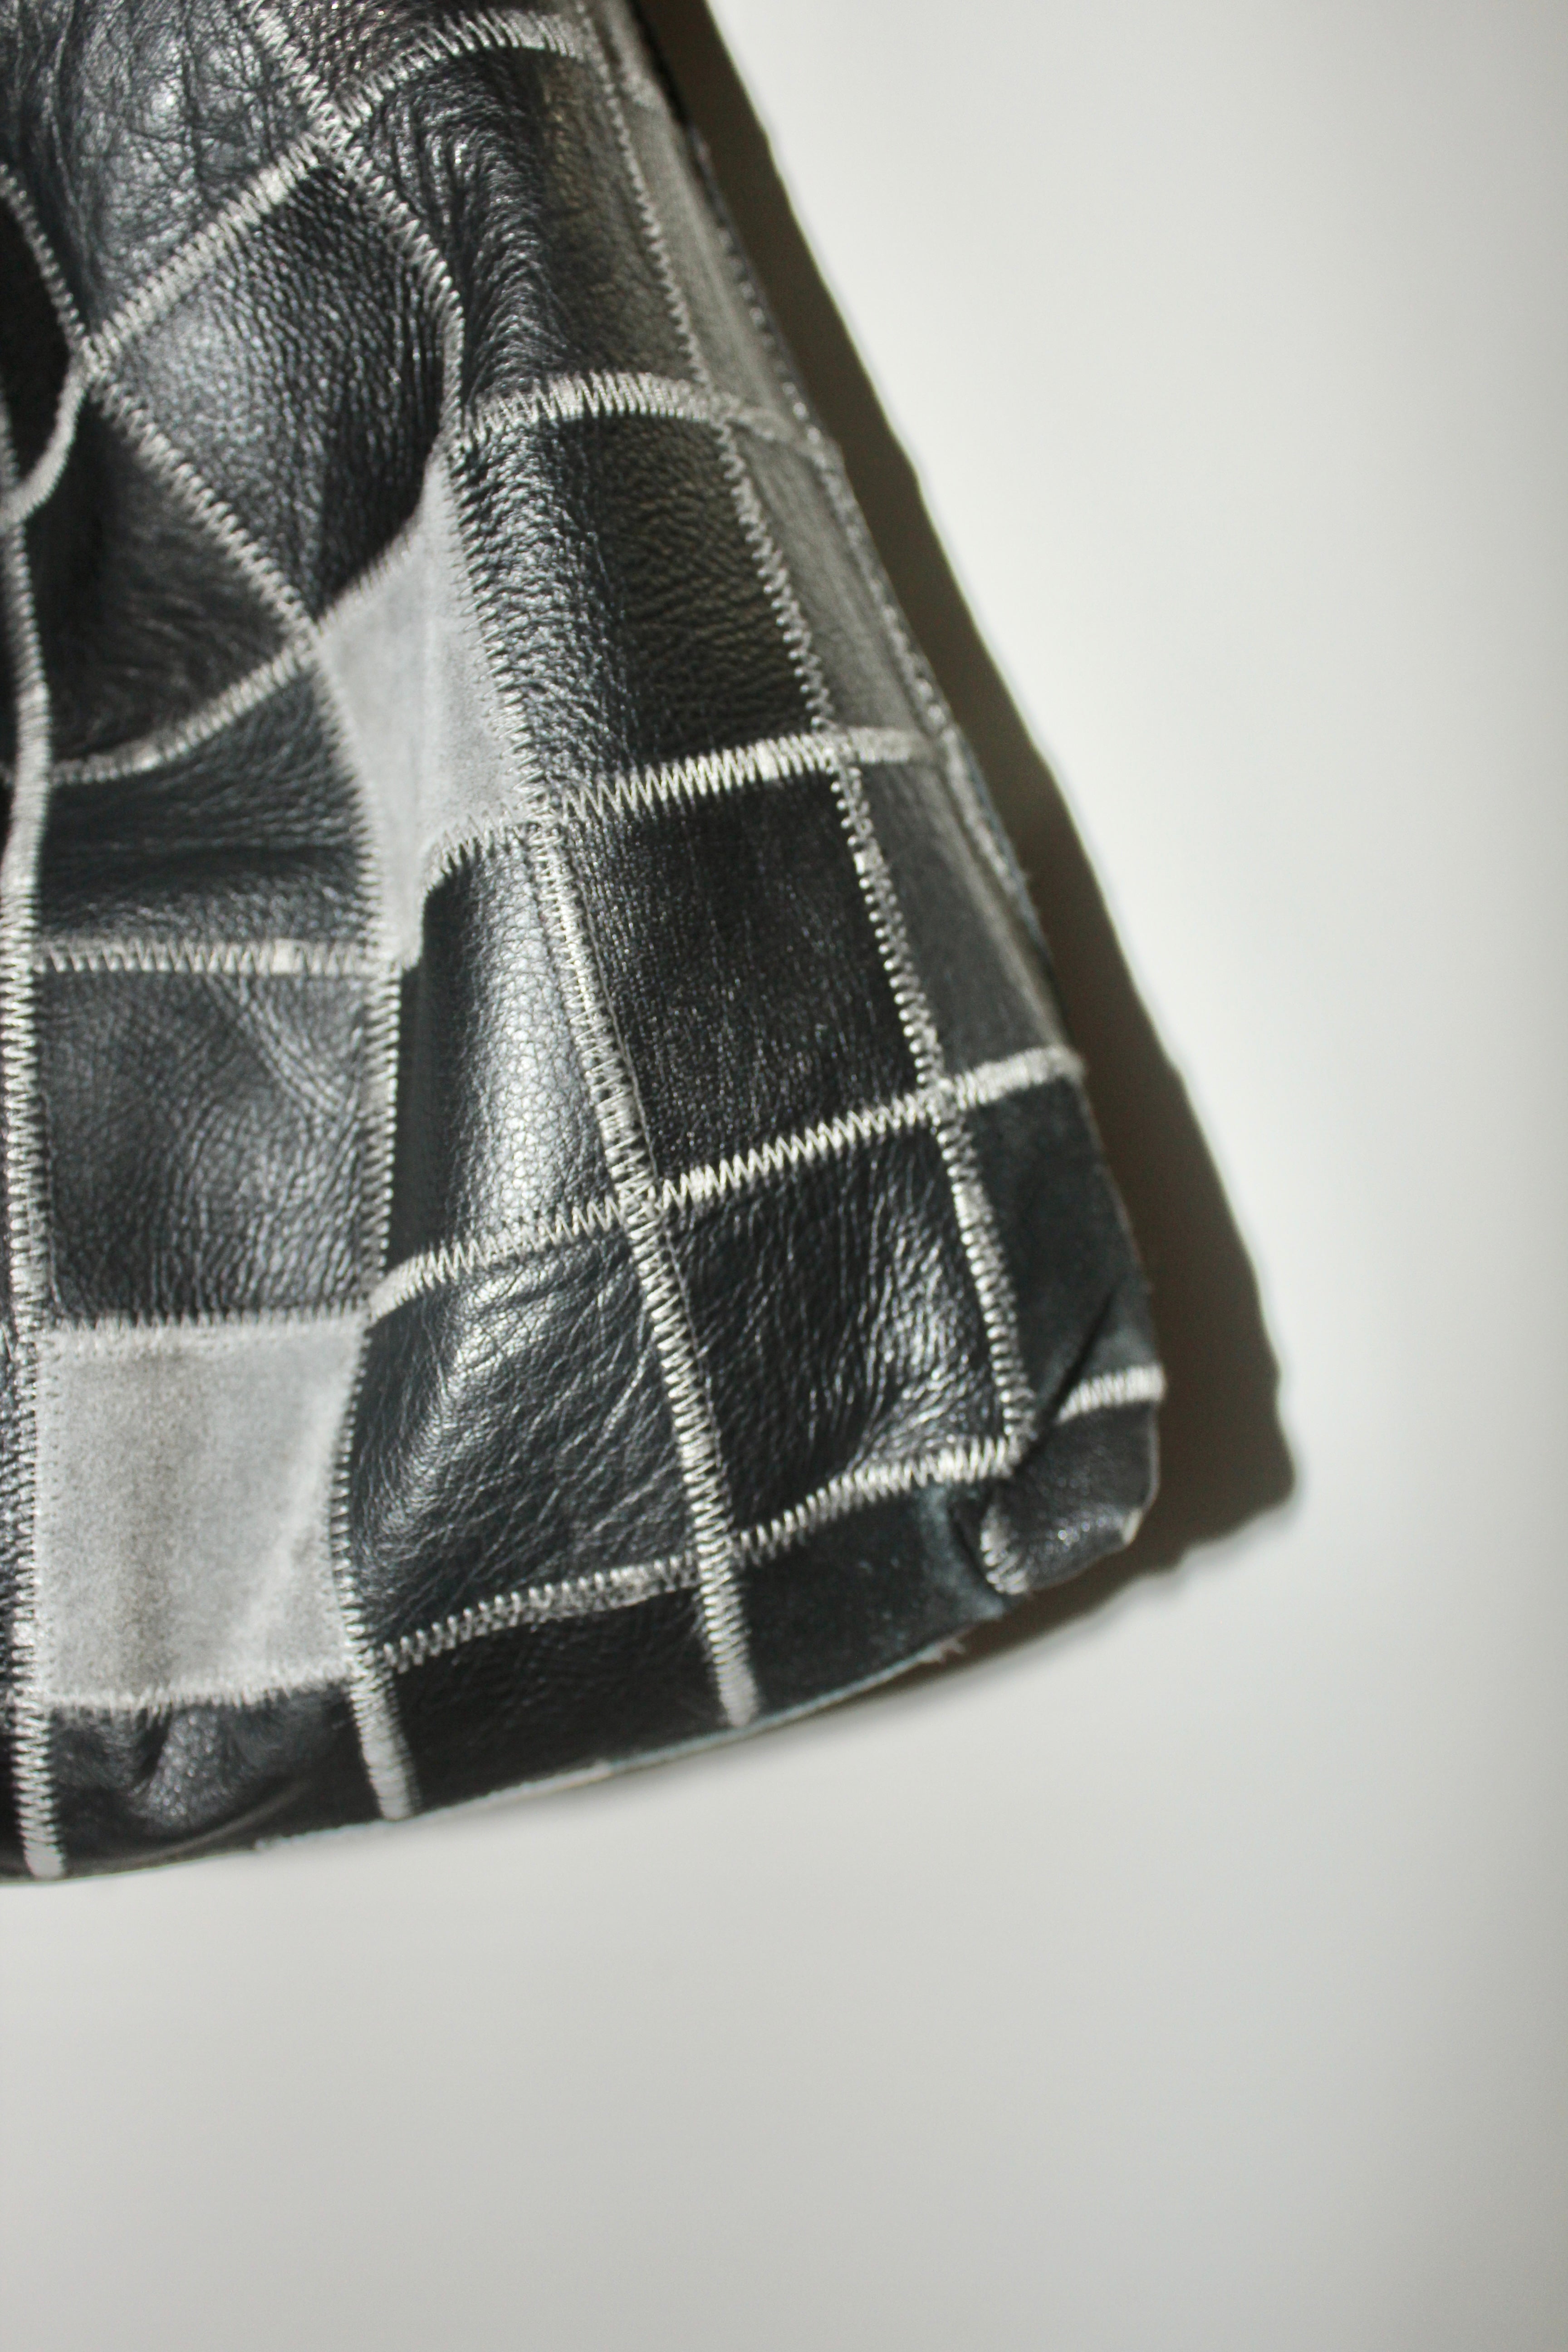 Vintage Leather Checkered Tote Bag